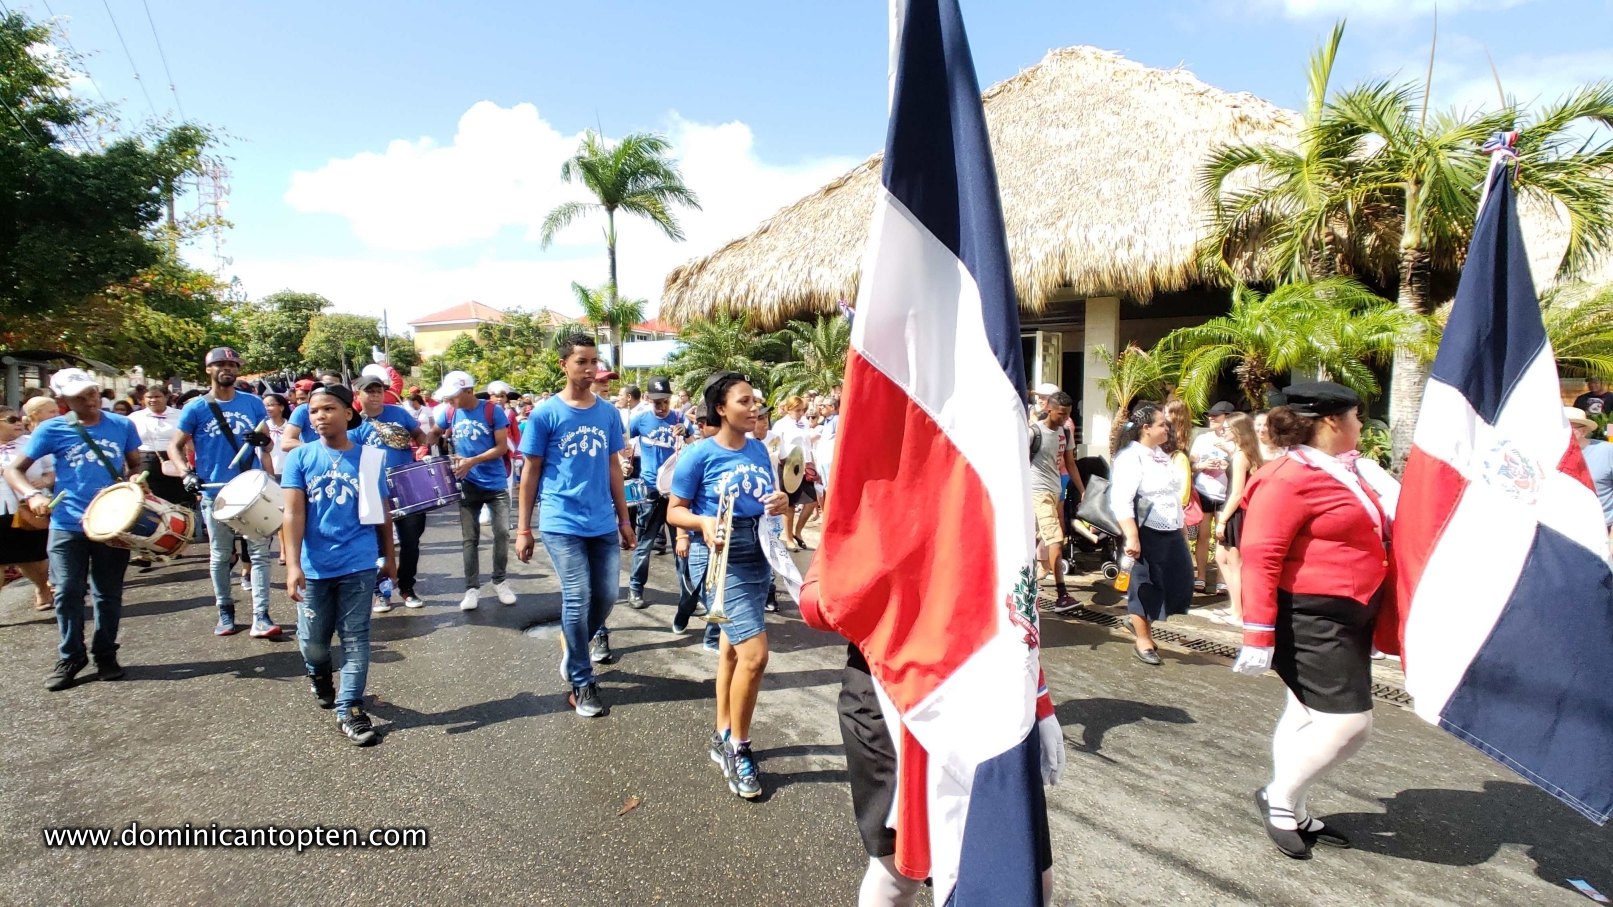 the independence parade attracted many locals